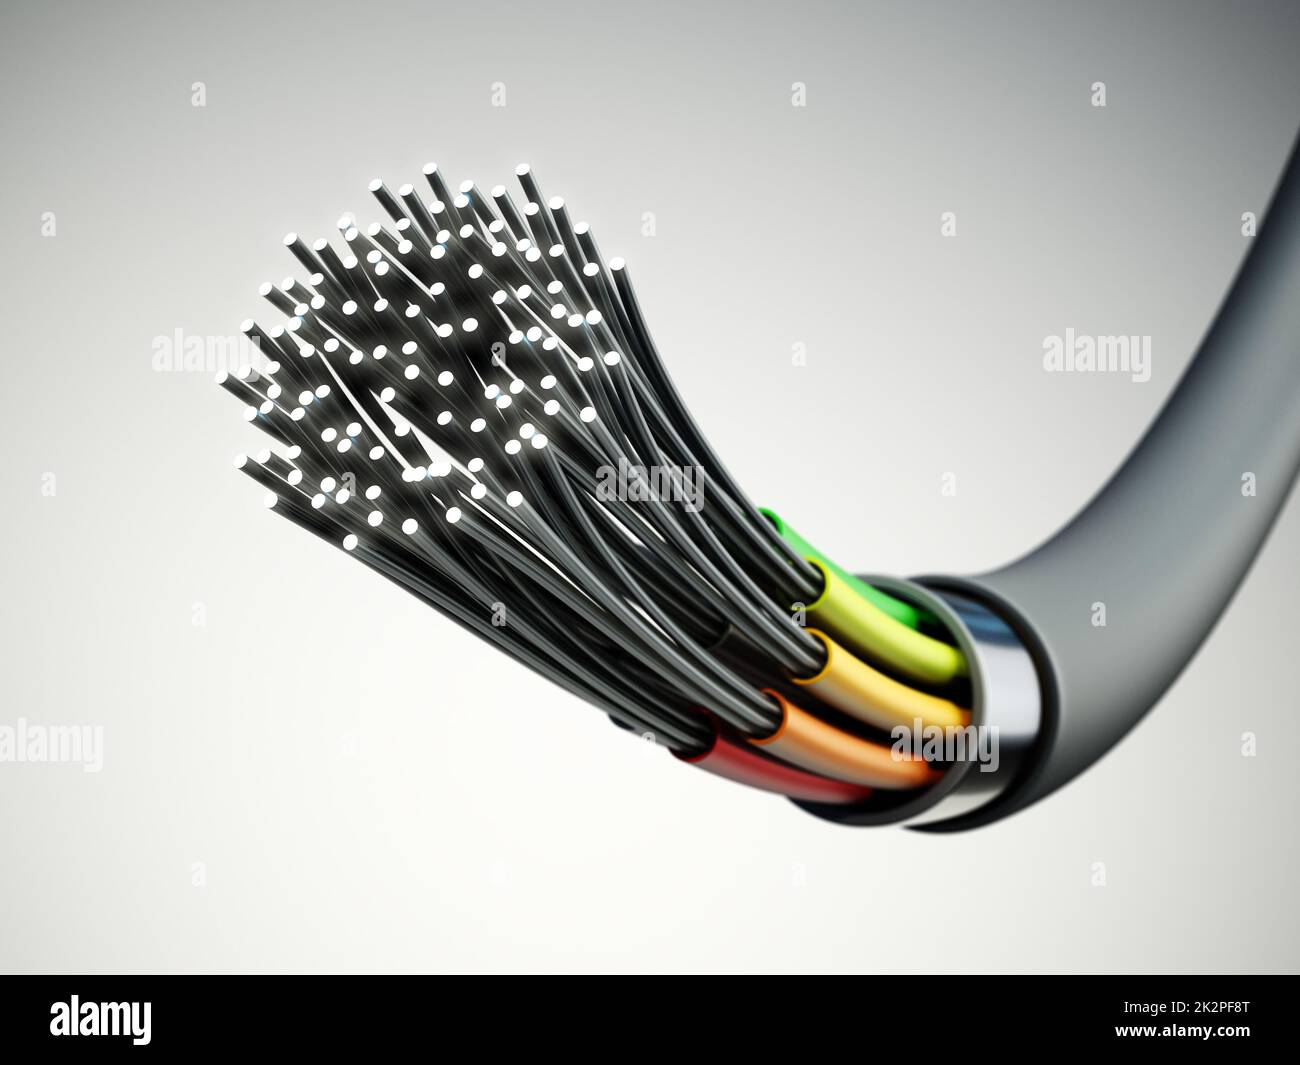 Fiber Optics Cable On White: Over 1,663 Royalty-Free Licensable Stock  Illustrations & Drawings